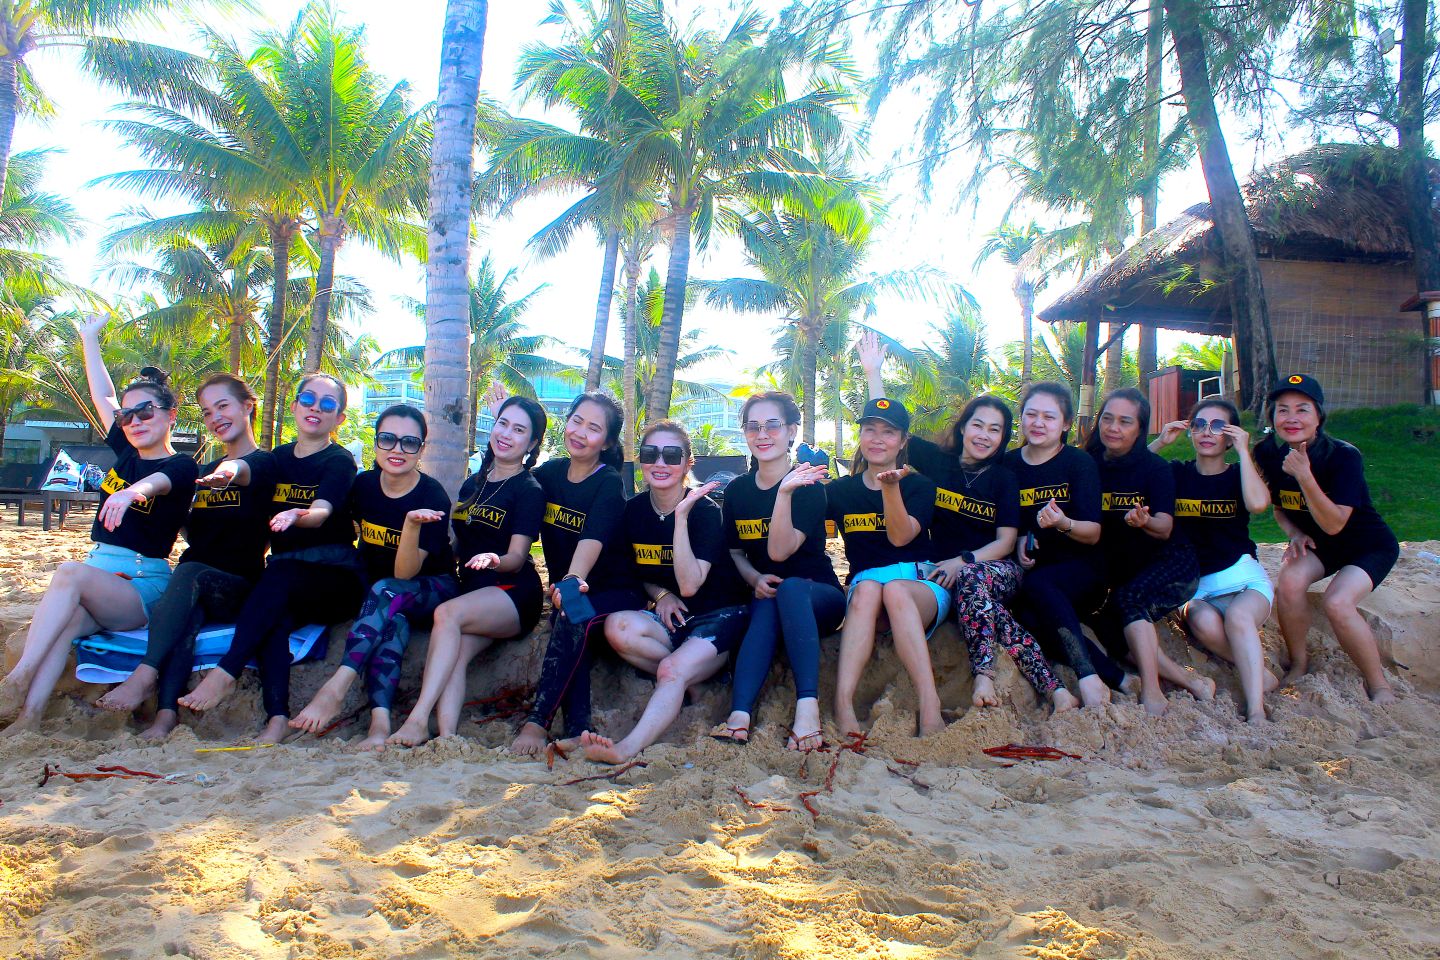 Phu Quoc tour is so successful and fun for tourists